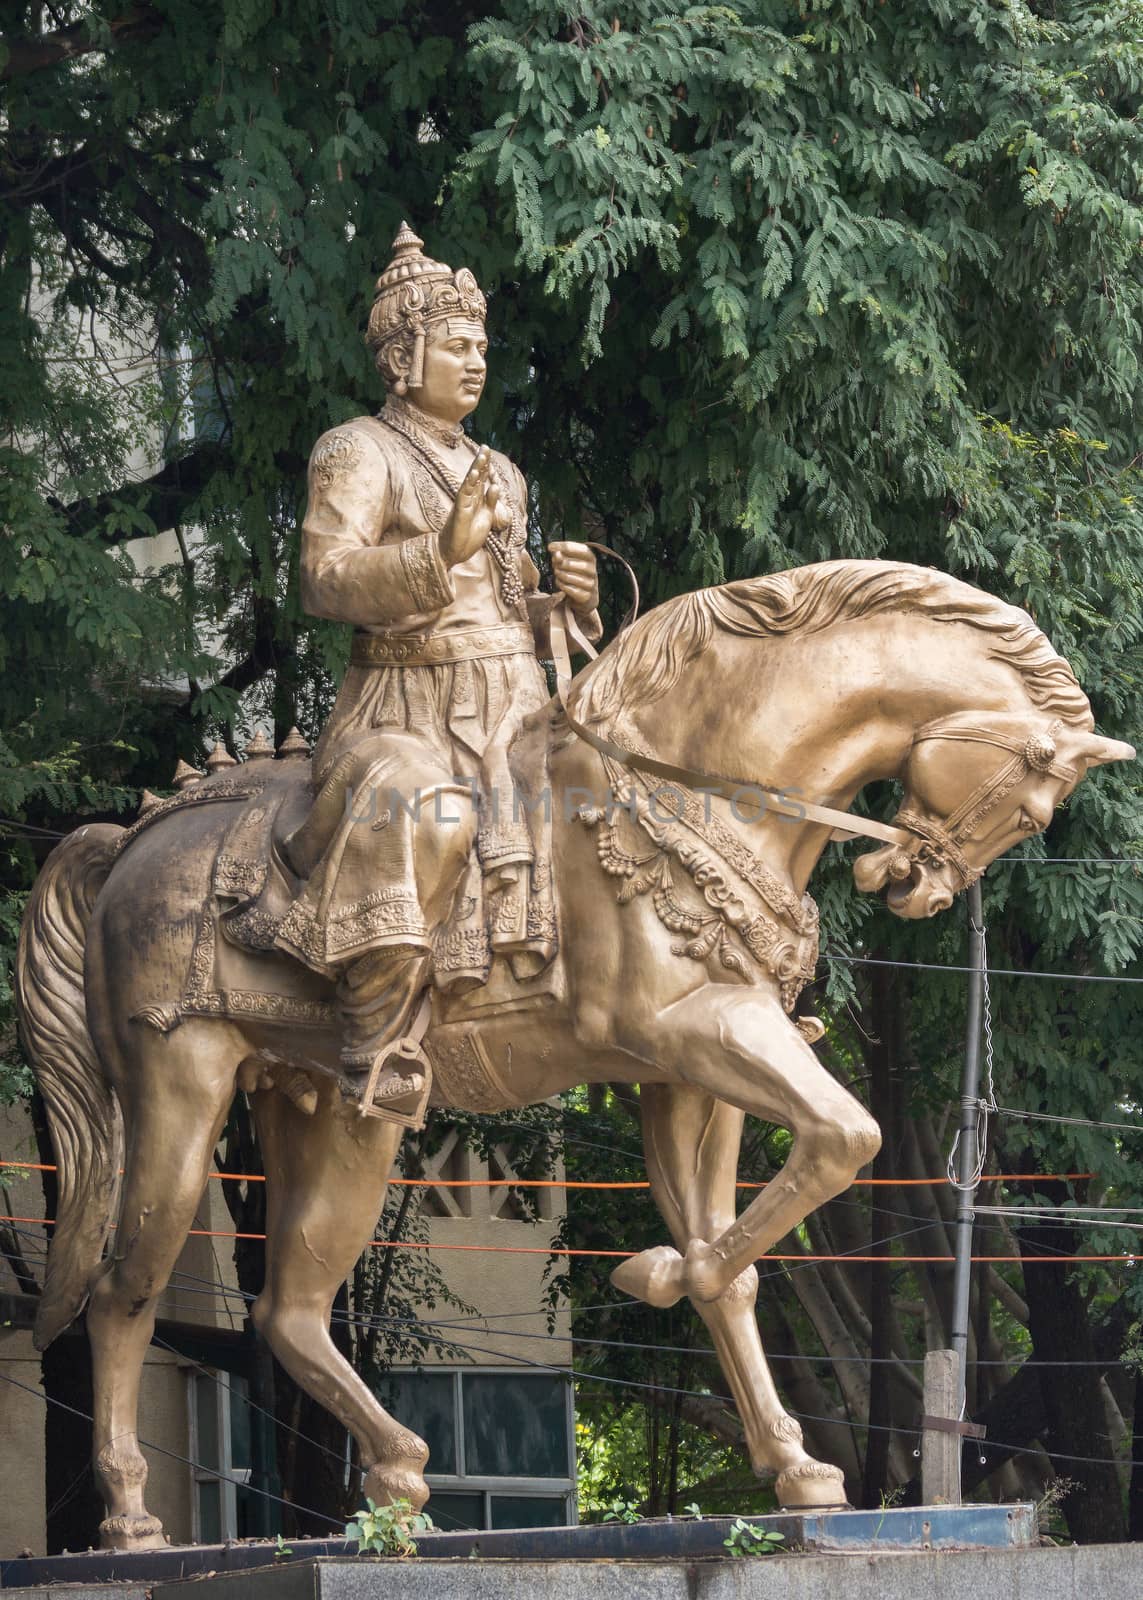 The statue of Sri Basavanna on its pedestal stands at the edge of Cubban Park in Bangalore. Basavanna was a statesman, a philosopher, a humanist and a social reformer in 12th century India.